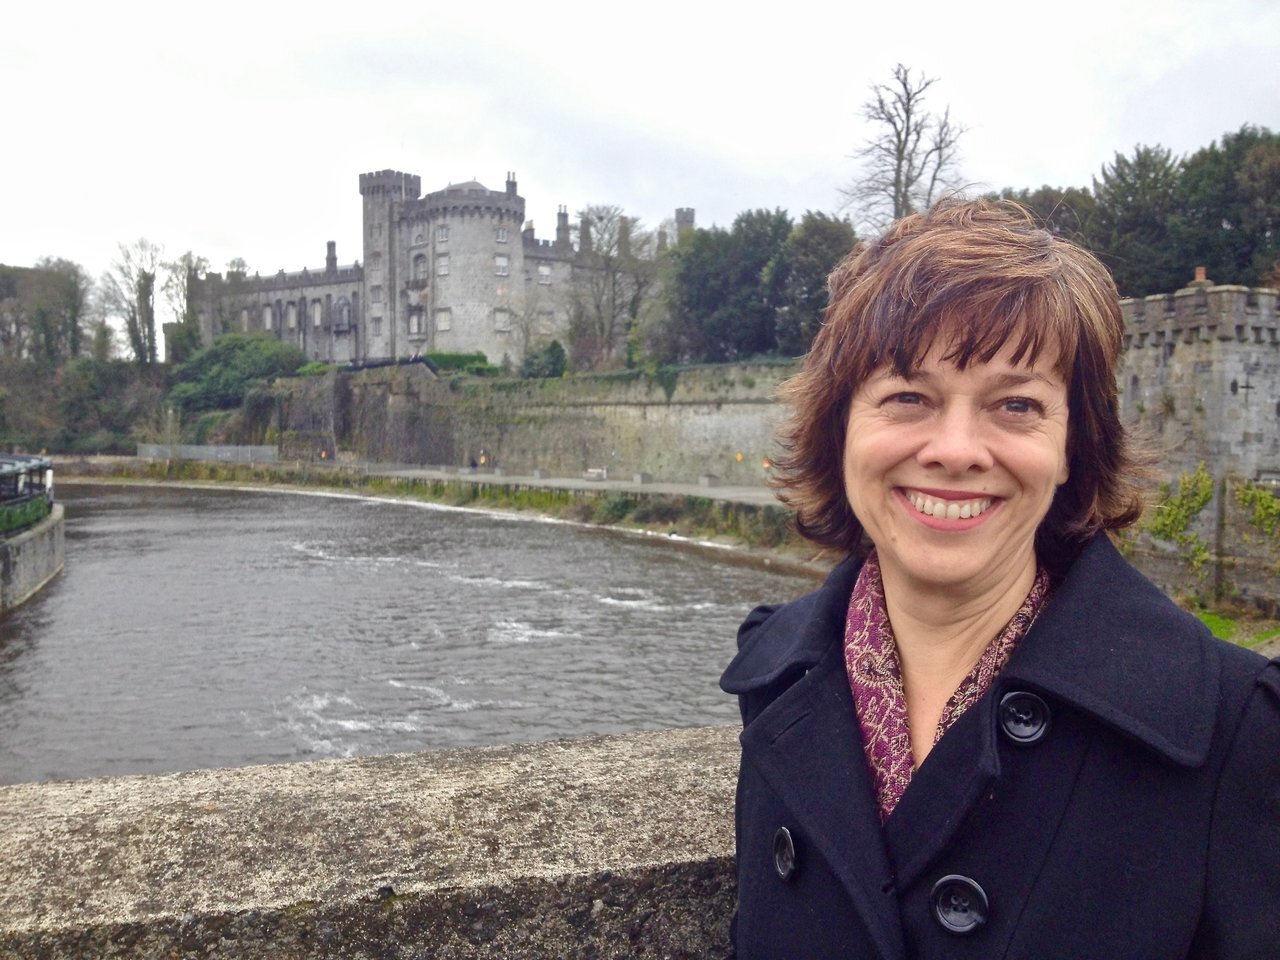 Kilkenny Castle on the River Nore